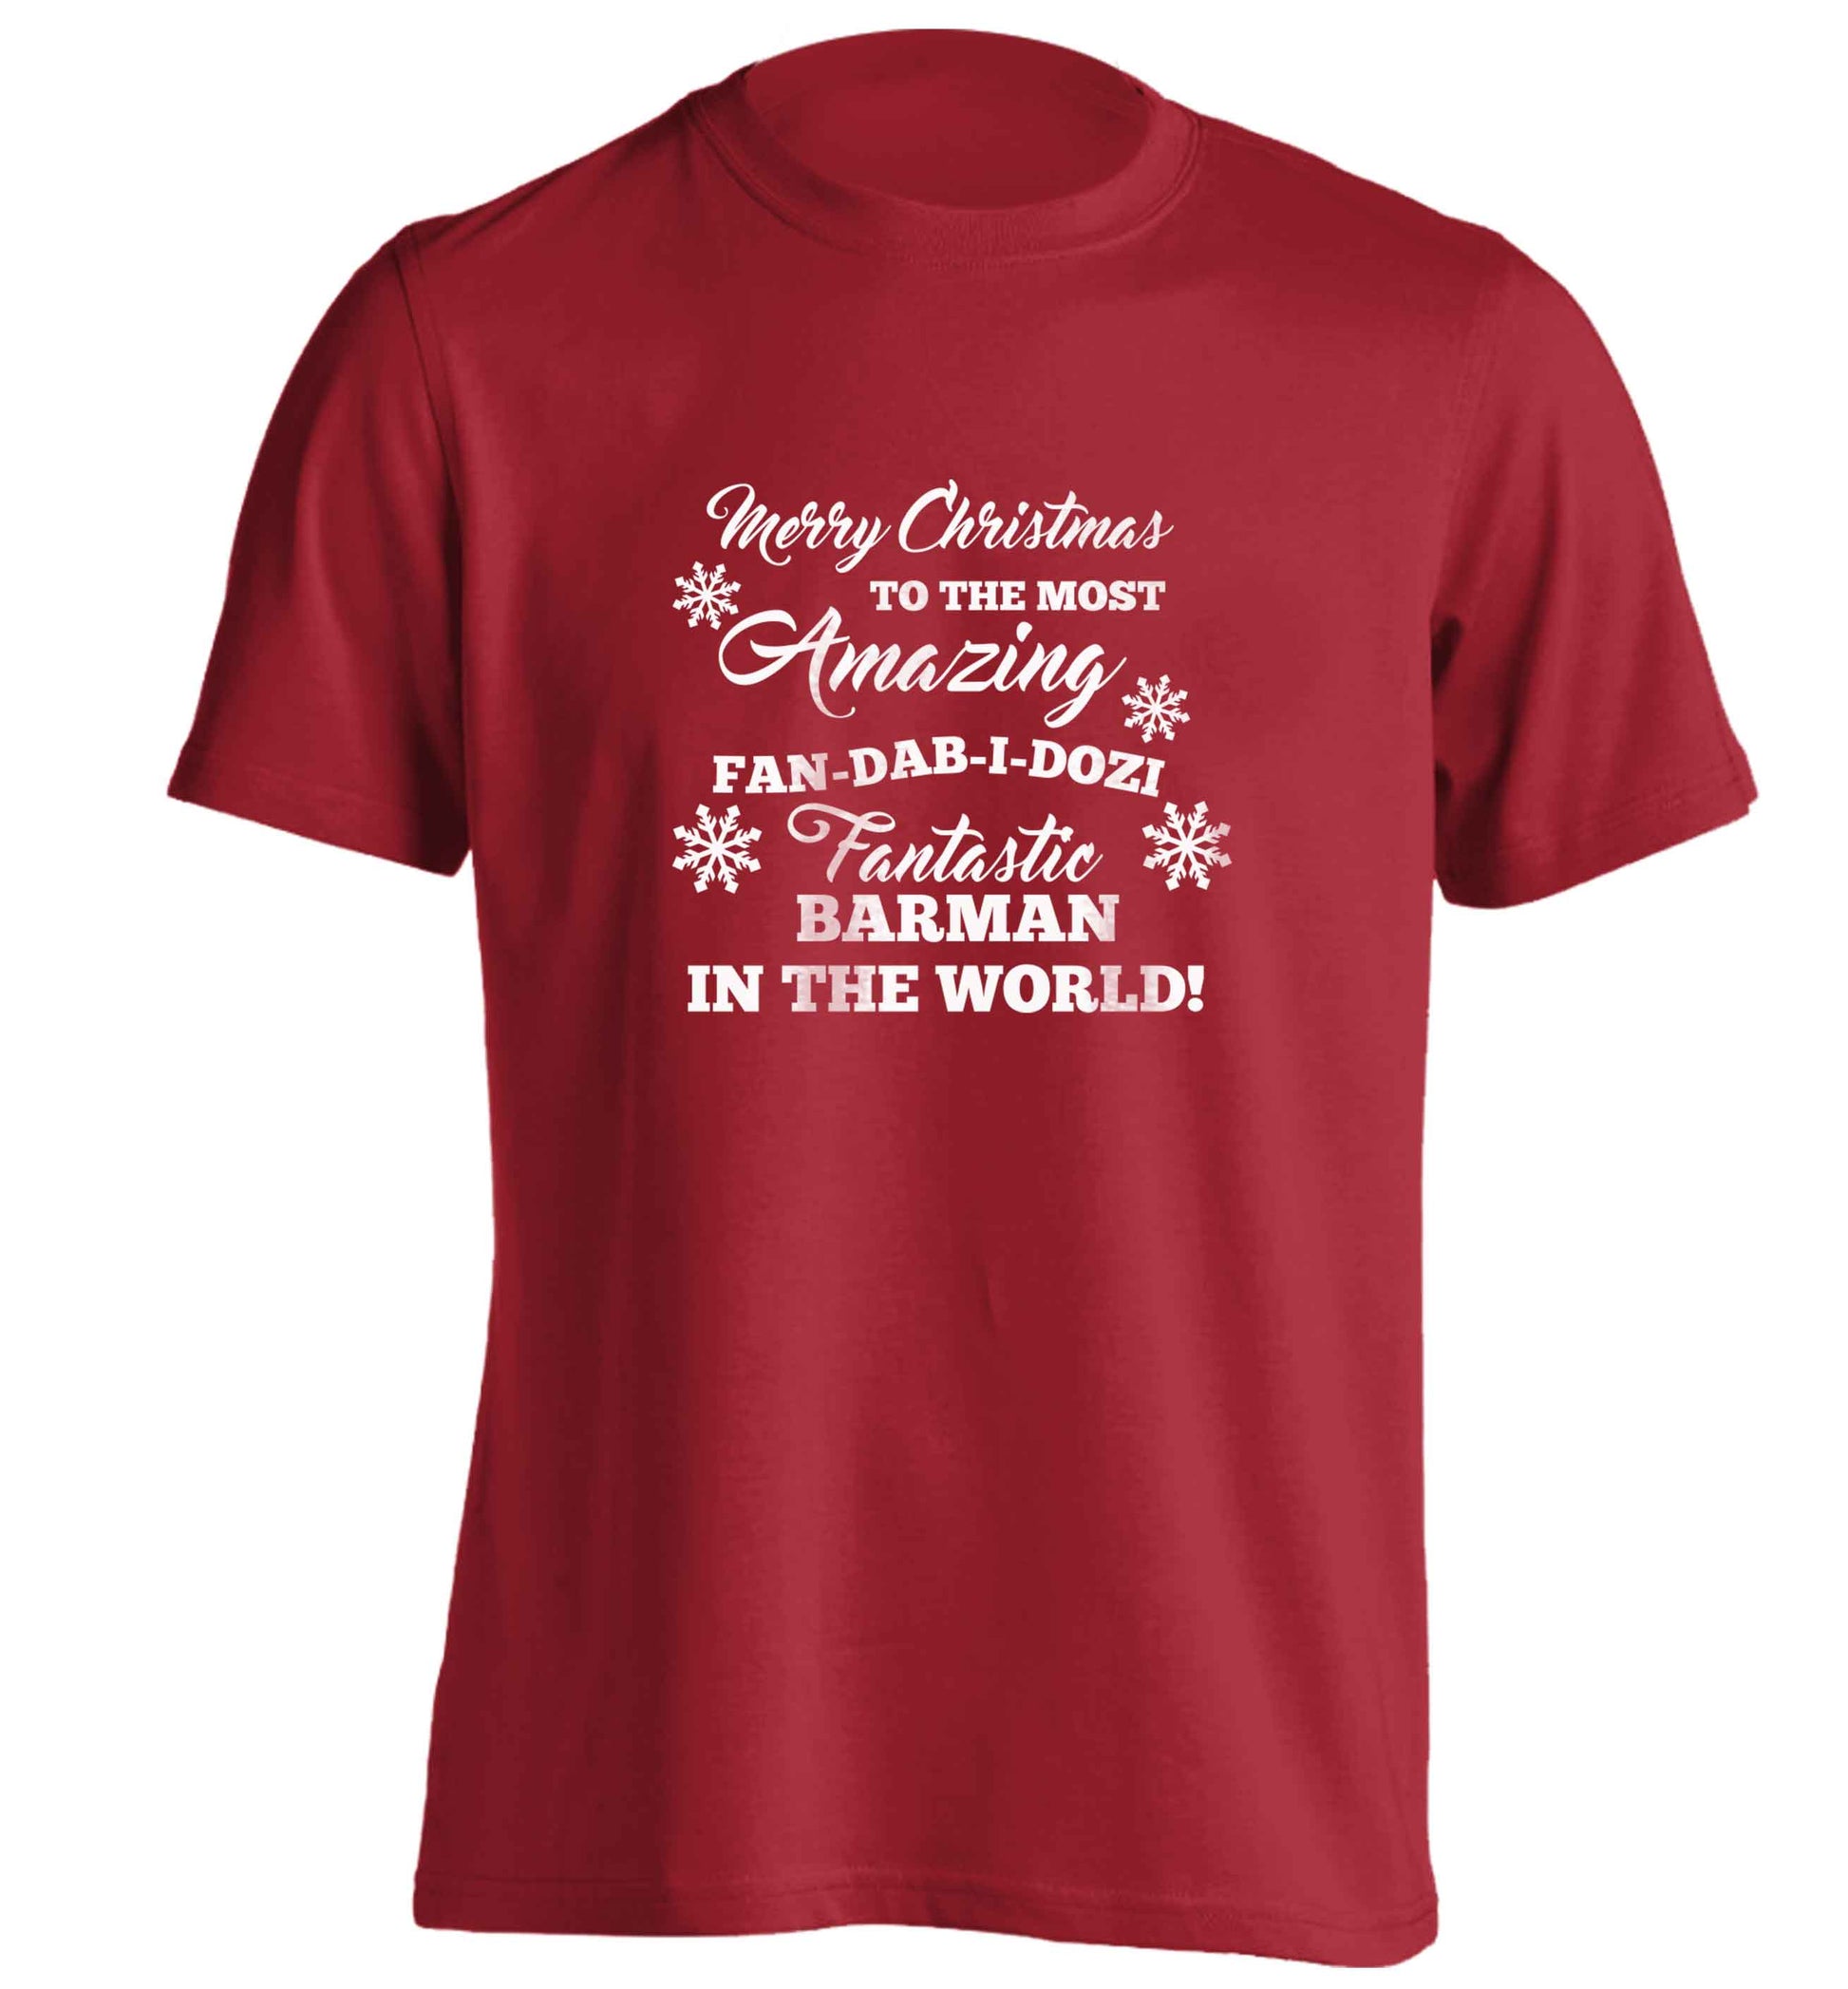 Merry Christmas to the most amazing barman in the world! adults unisex red Tshirt 2XL